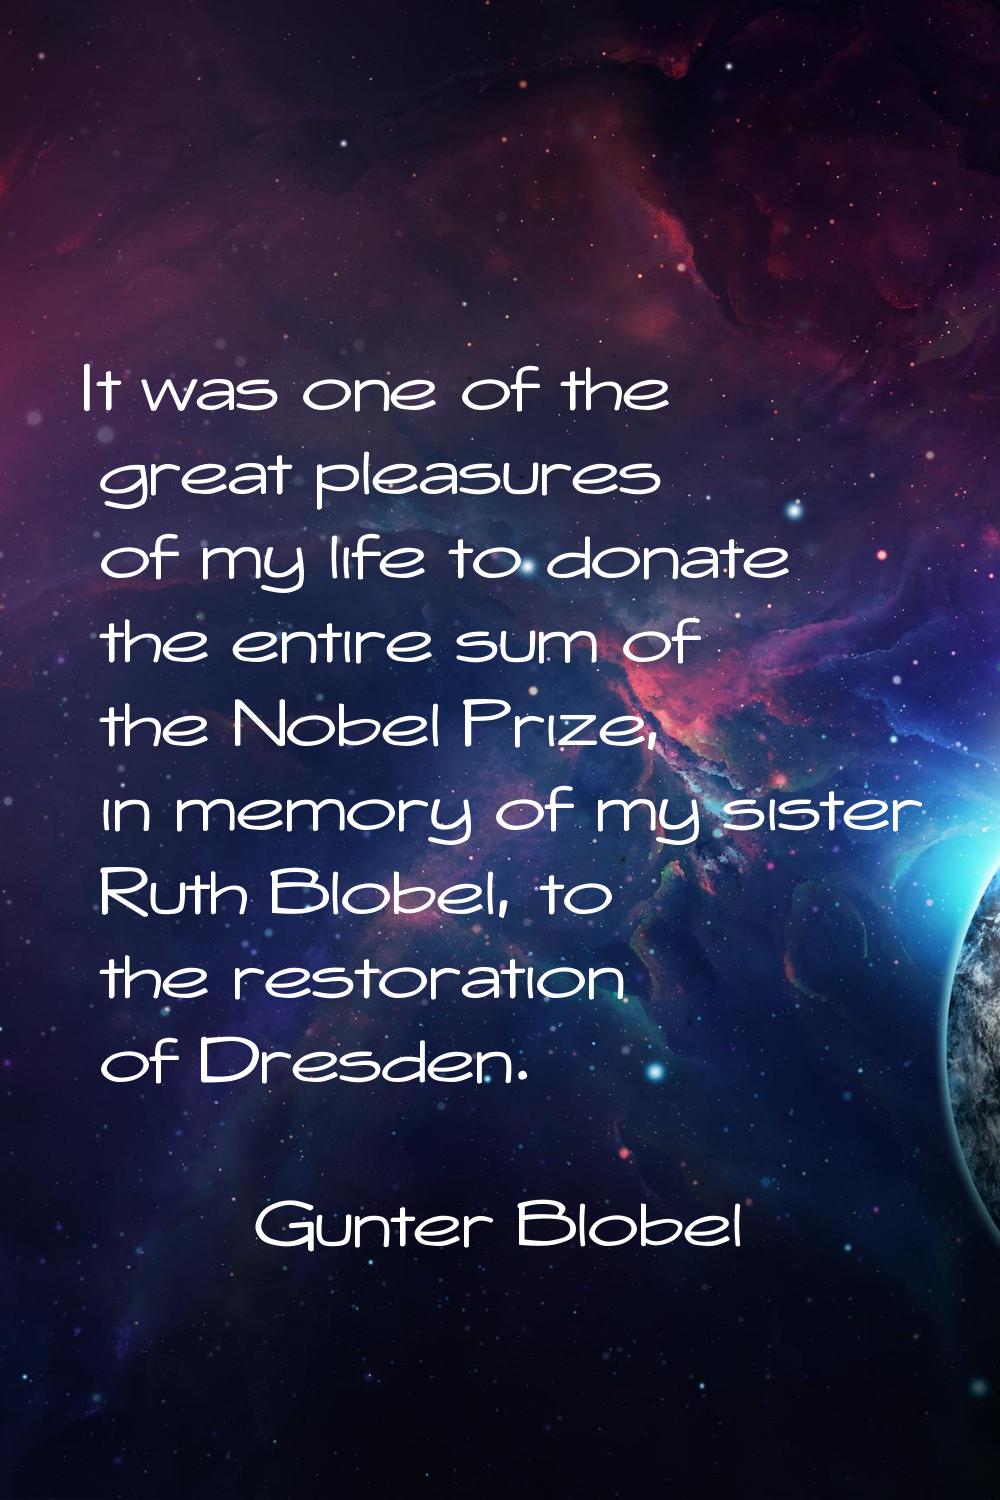 It was one of the great pleasures of my life to donate the entire sum of the Nobel Prize, in memory